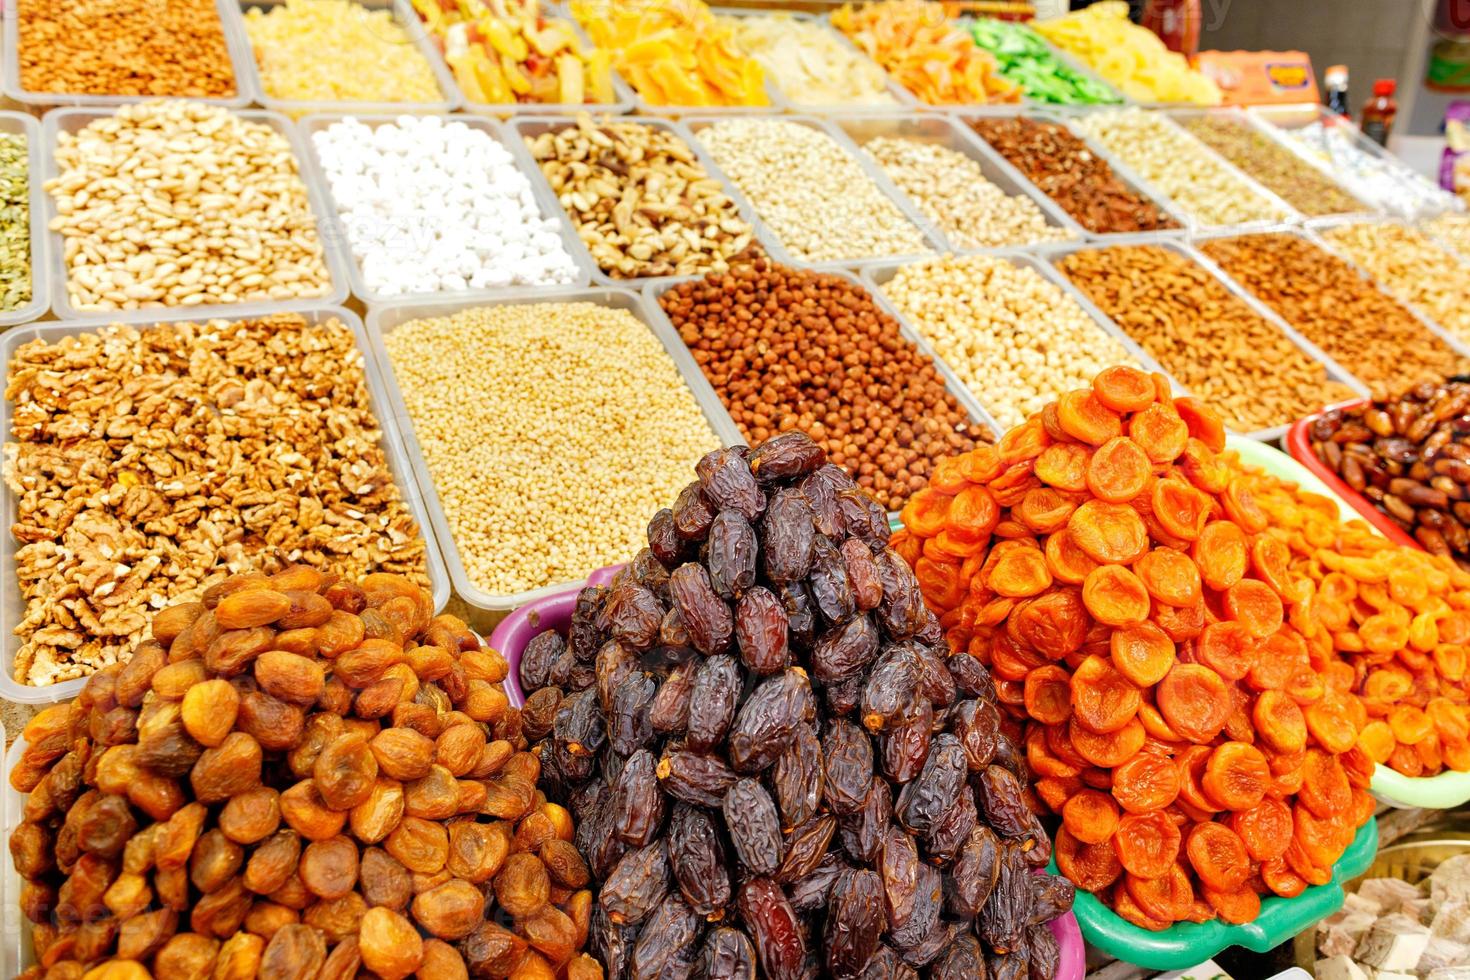 Dates, dried apricots, almonds, hazelnuts, walnuts, cashews are sold in the market. photo